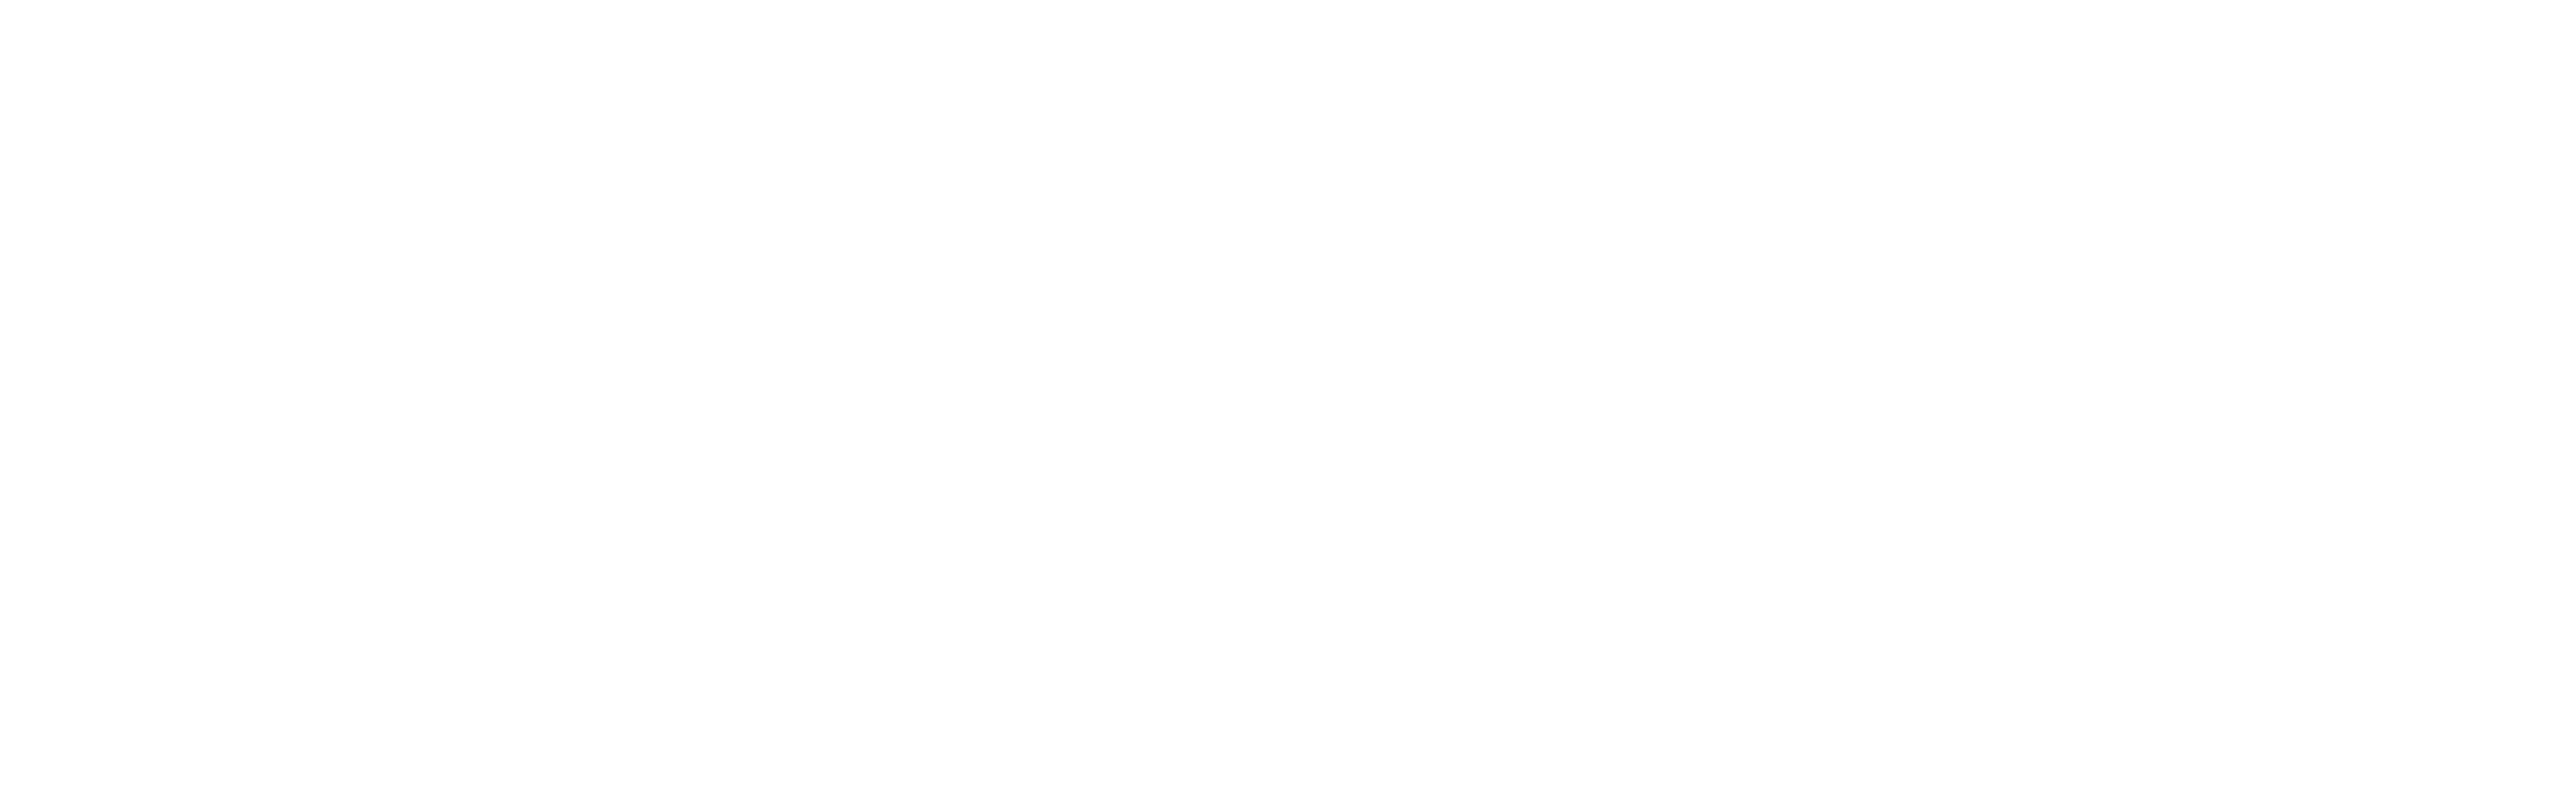 Shearwater Products